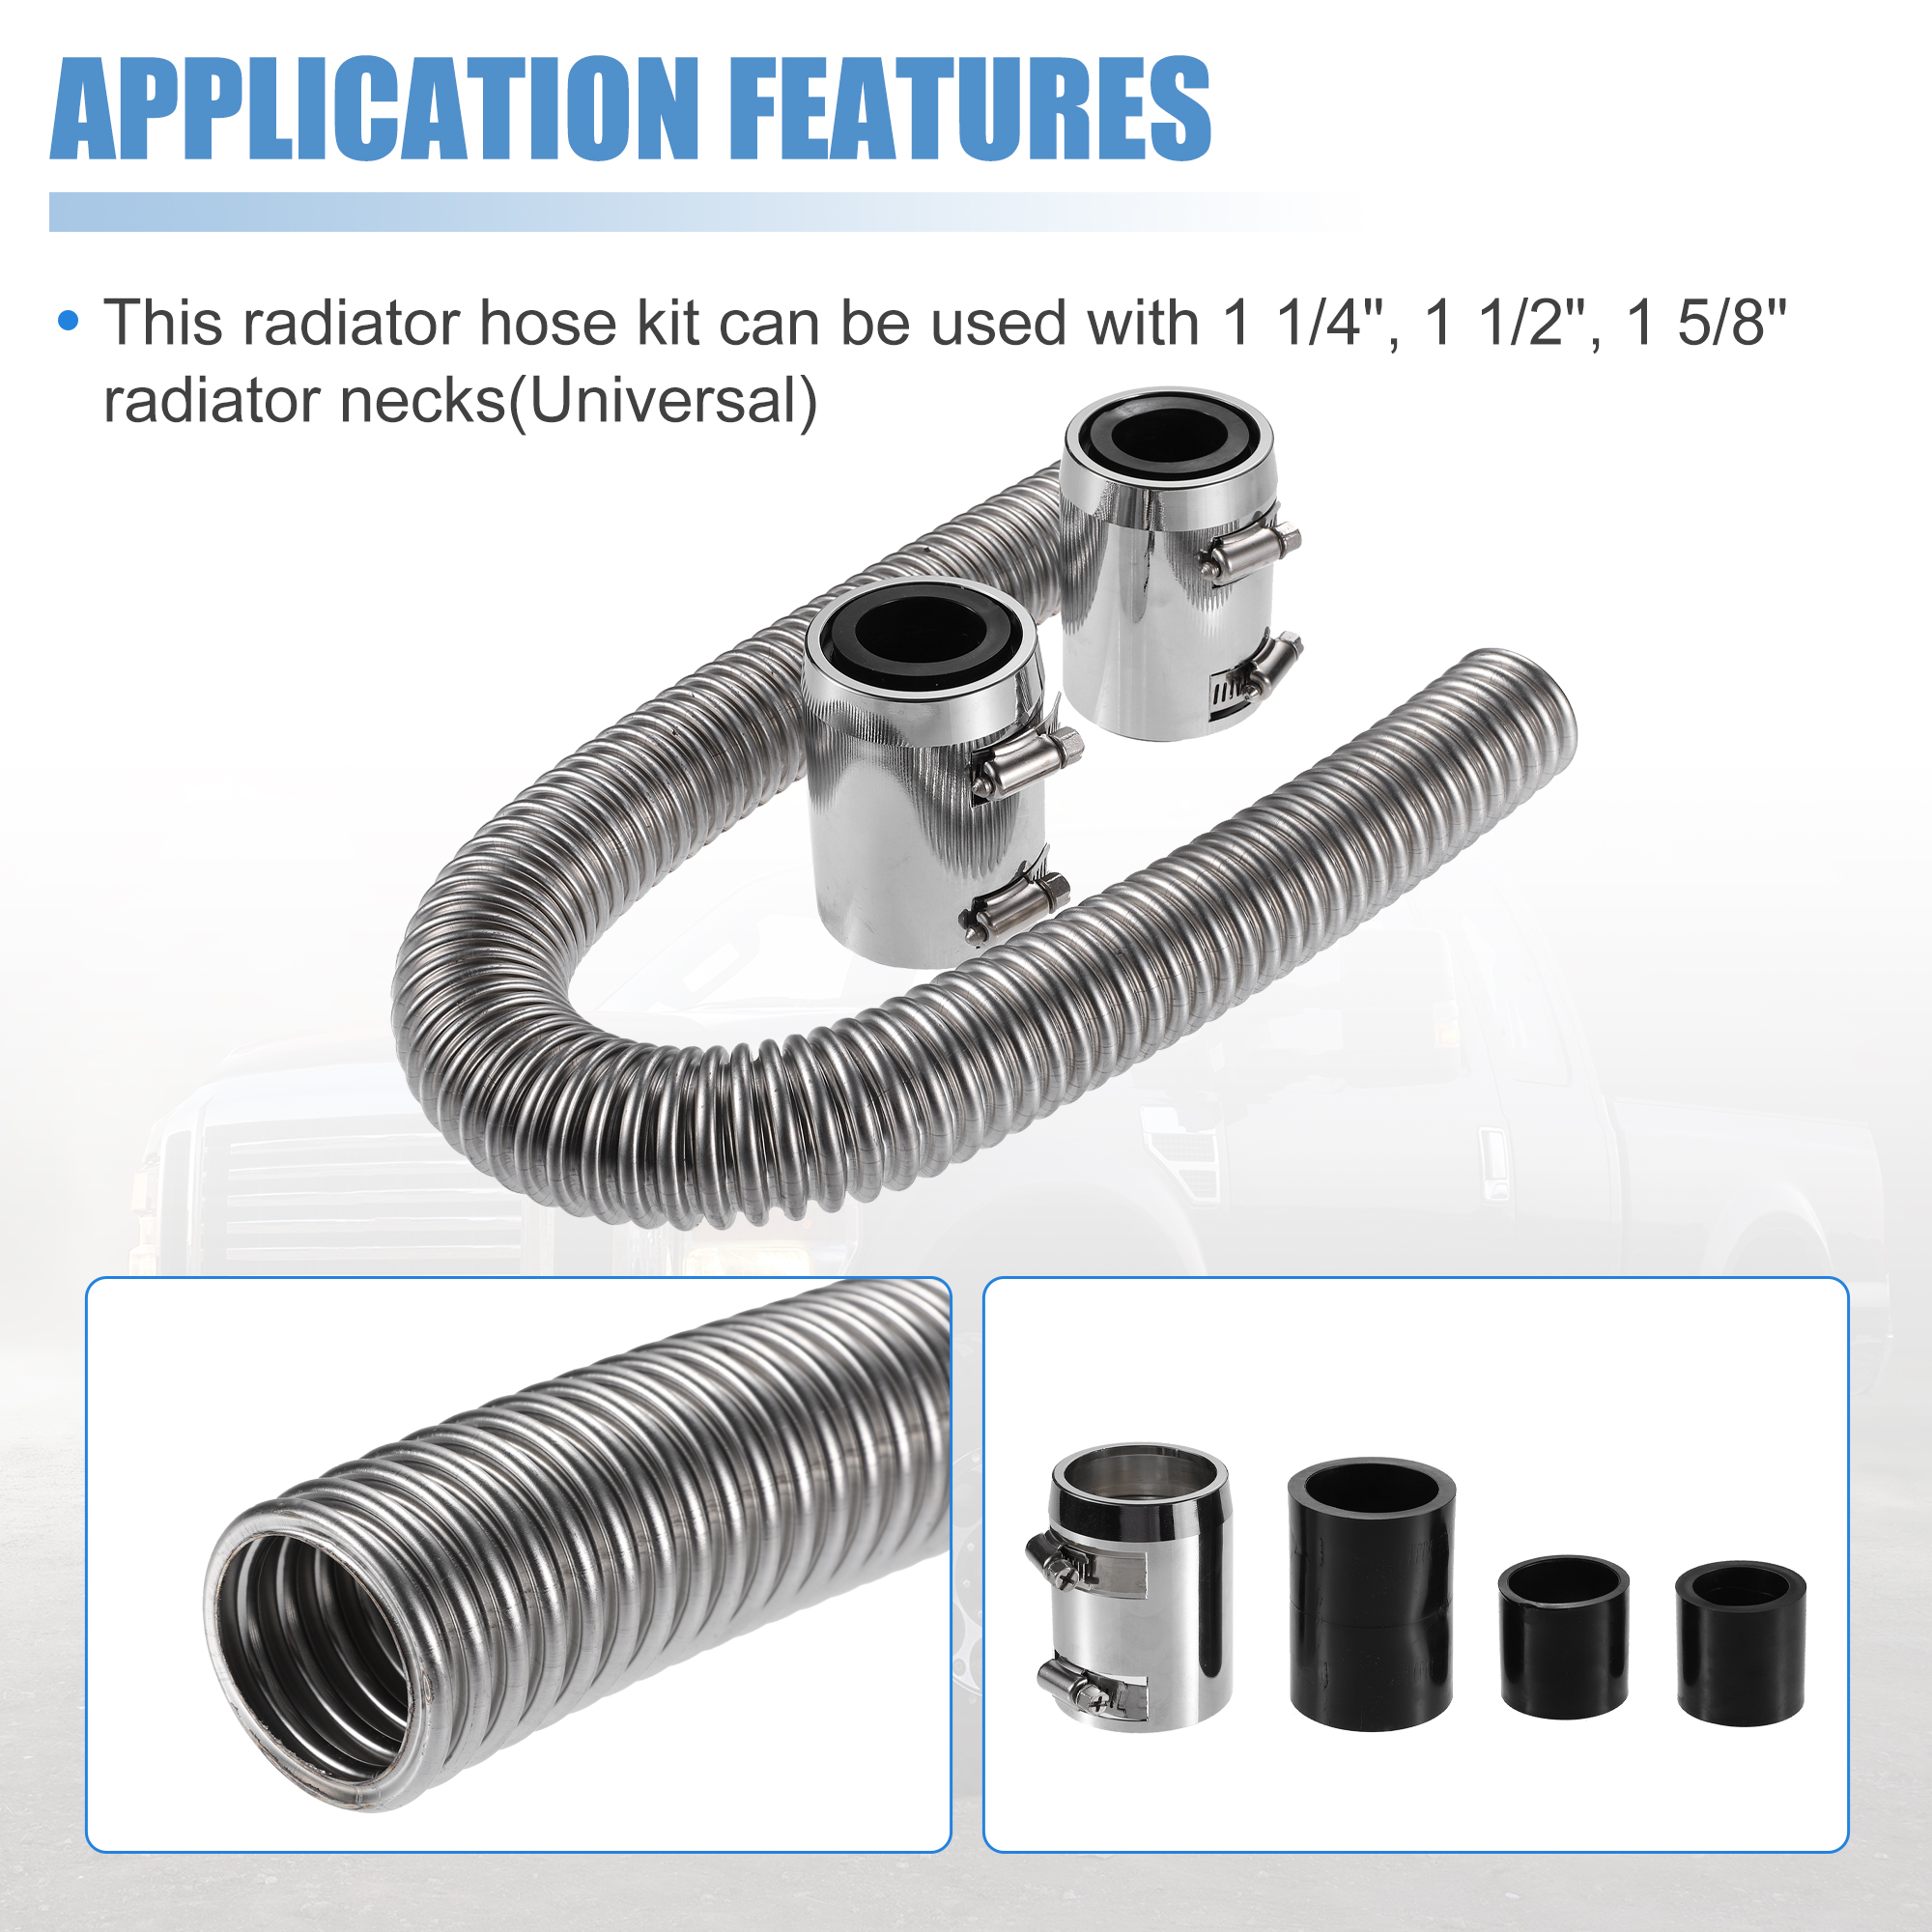 Unique Bargains 1Set 24 inch Flexible Radiator Hose Kit with 2 Clamps Replacement Silver Tone